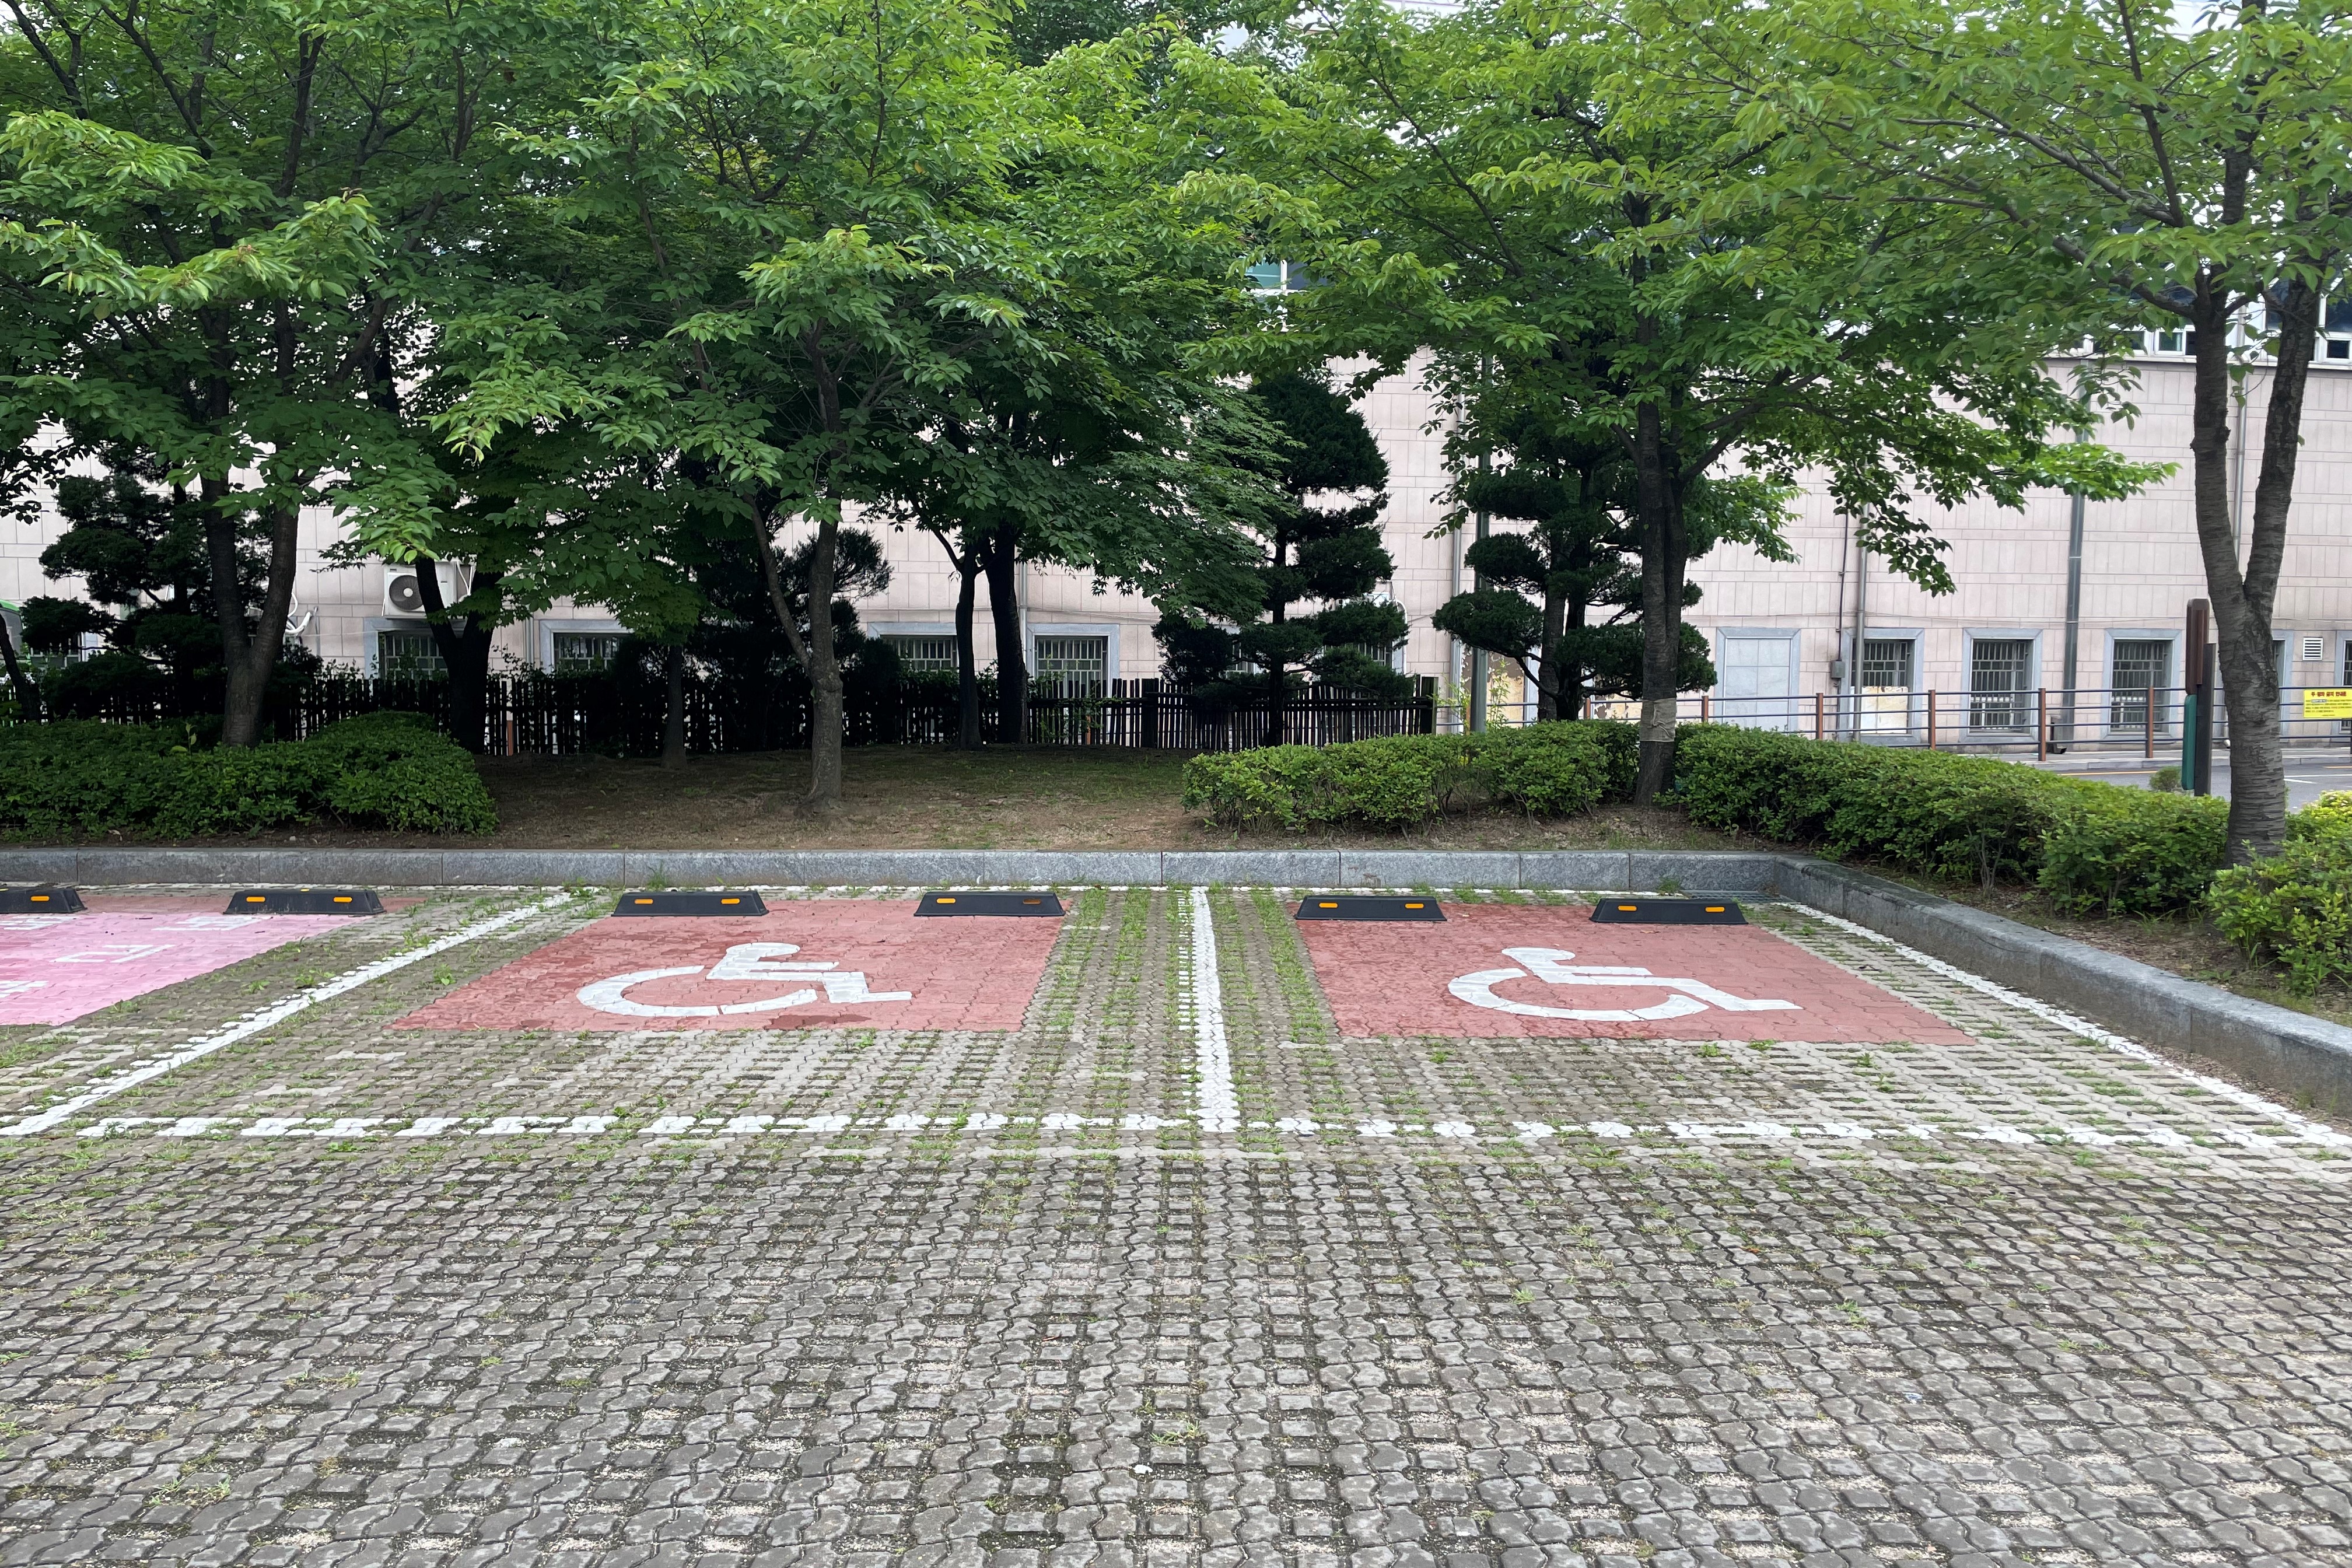 Accessible parking lots0 : Spacious and flat parking lots for wheelchair users